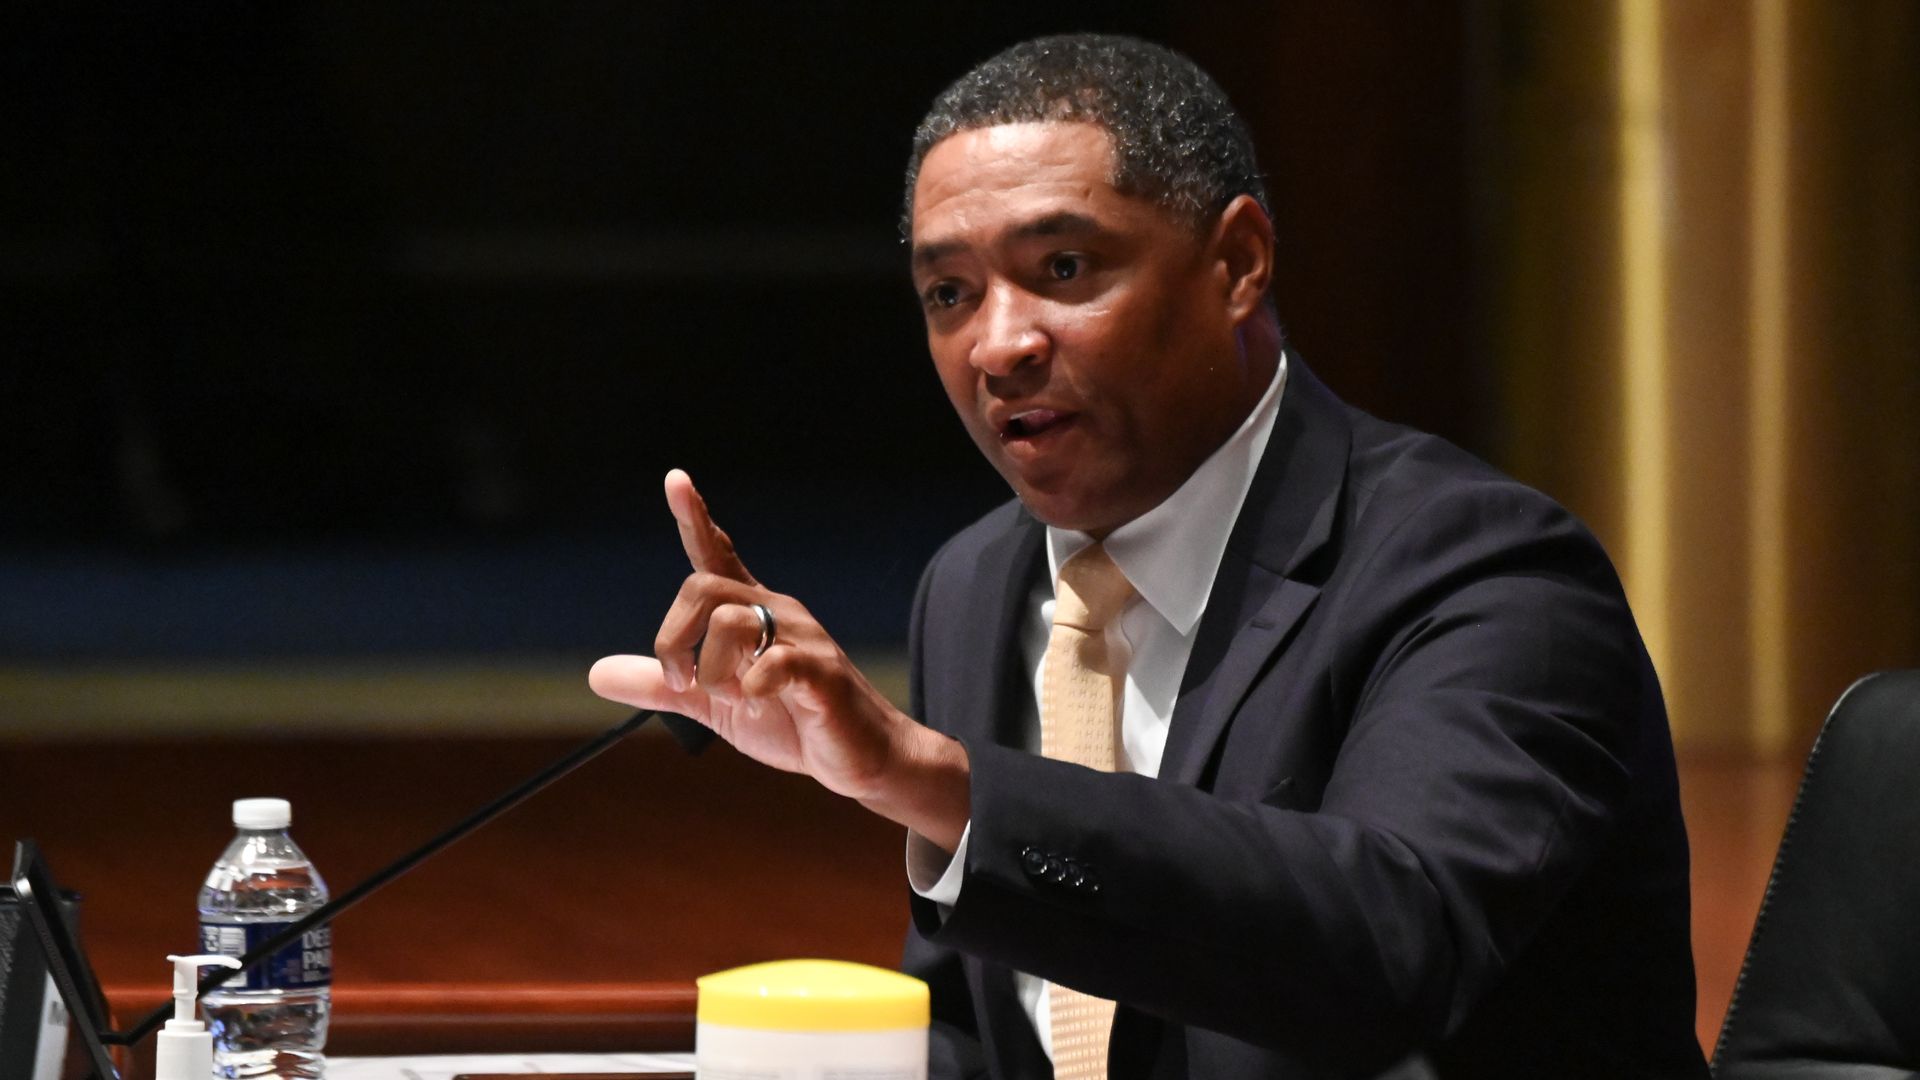 Representative Cedric Richmond, a Democrat from Louisiana, speaks during a markup on H.R. 7120, the "Justice in Policing Act of 2020," on June 17